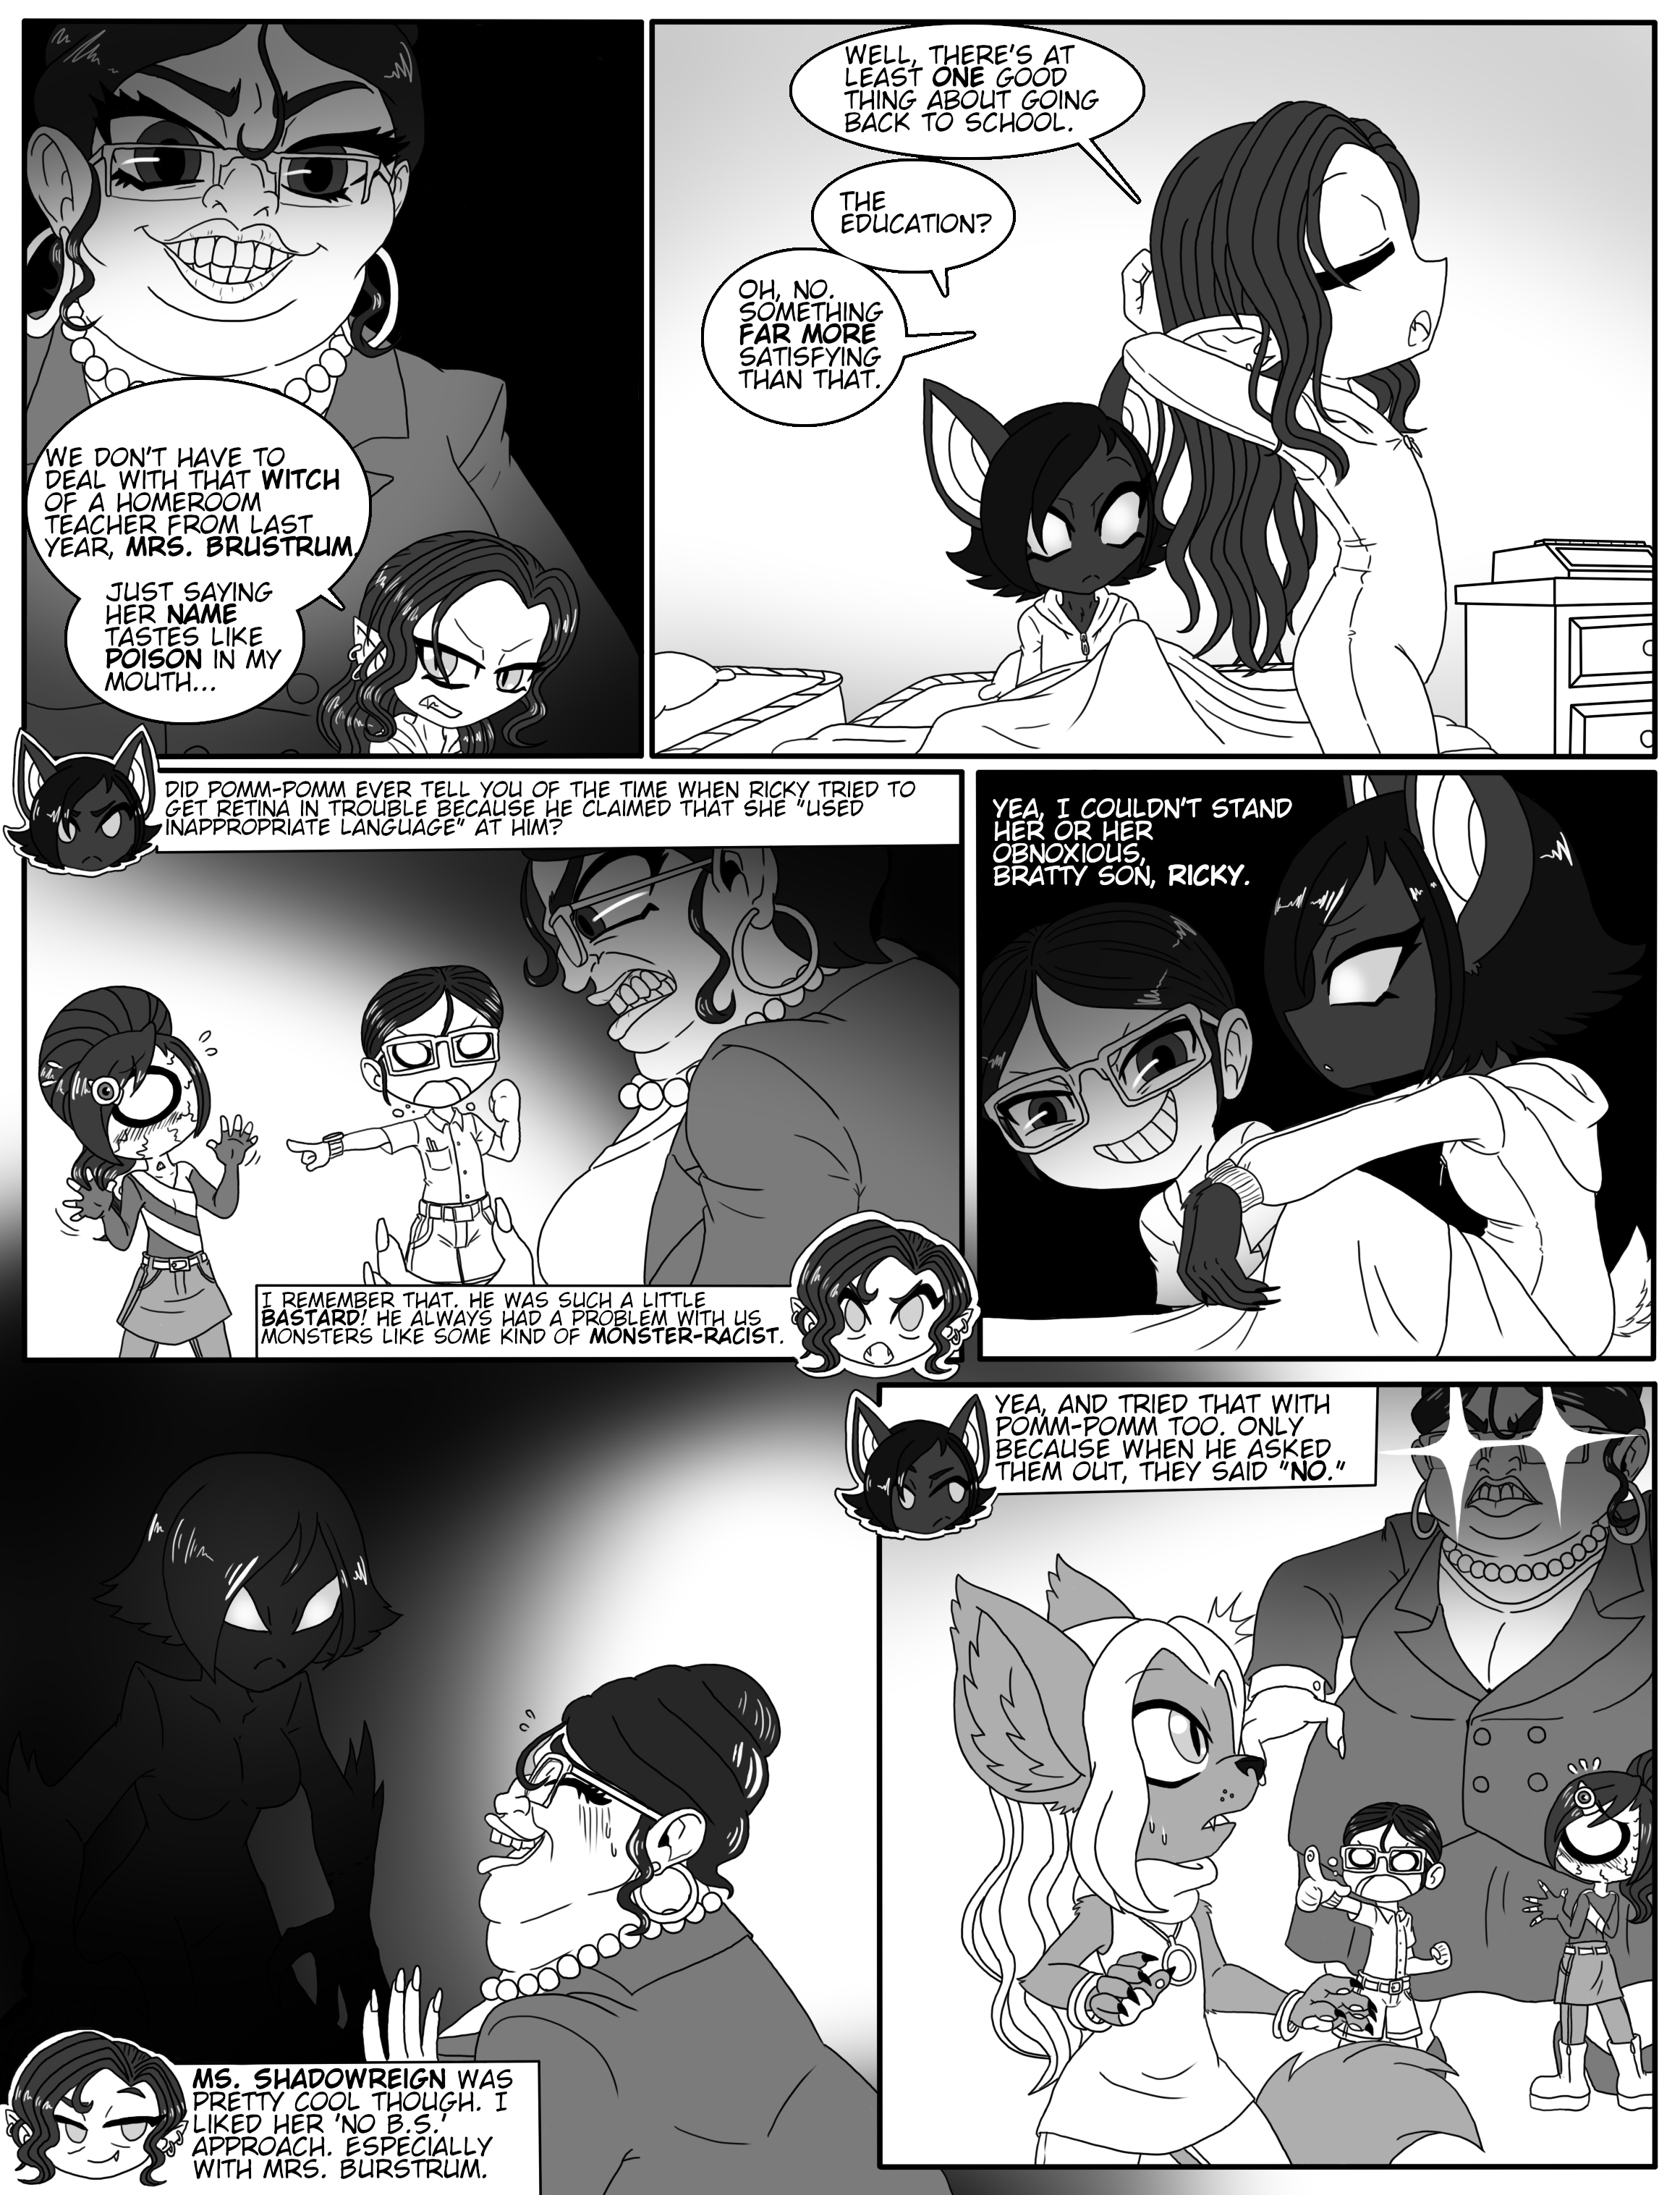 Back to School - Chapter 1 - Page 5 by PlayboyVampire on DeviantArt